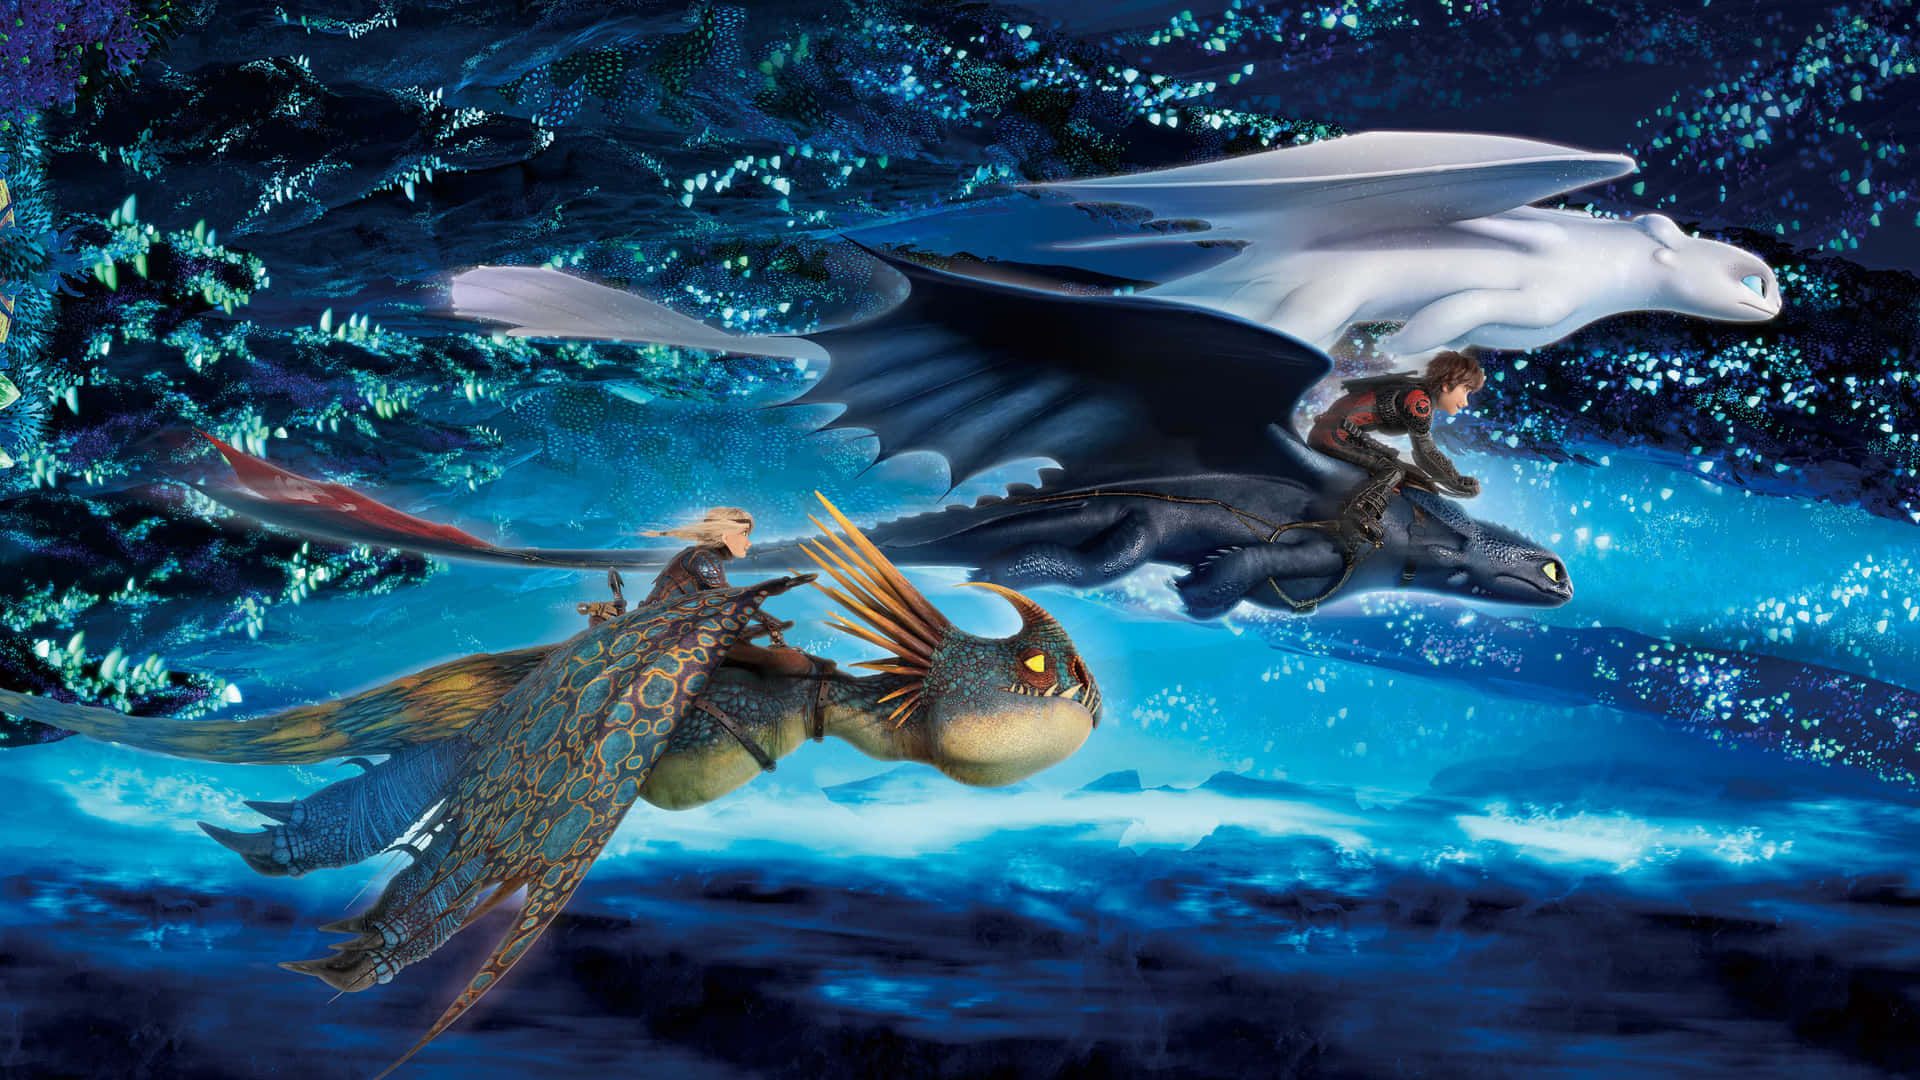 How To Train Your Dragon The Hidden World Flying at Night Wallpaper